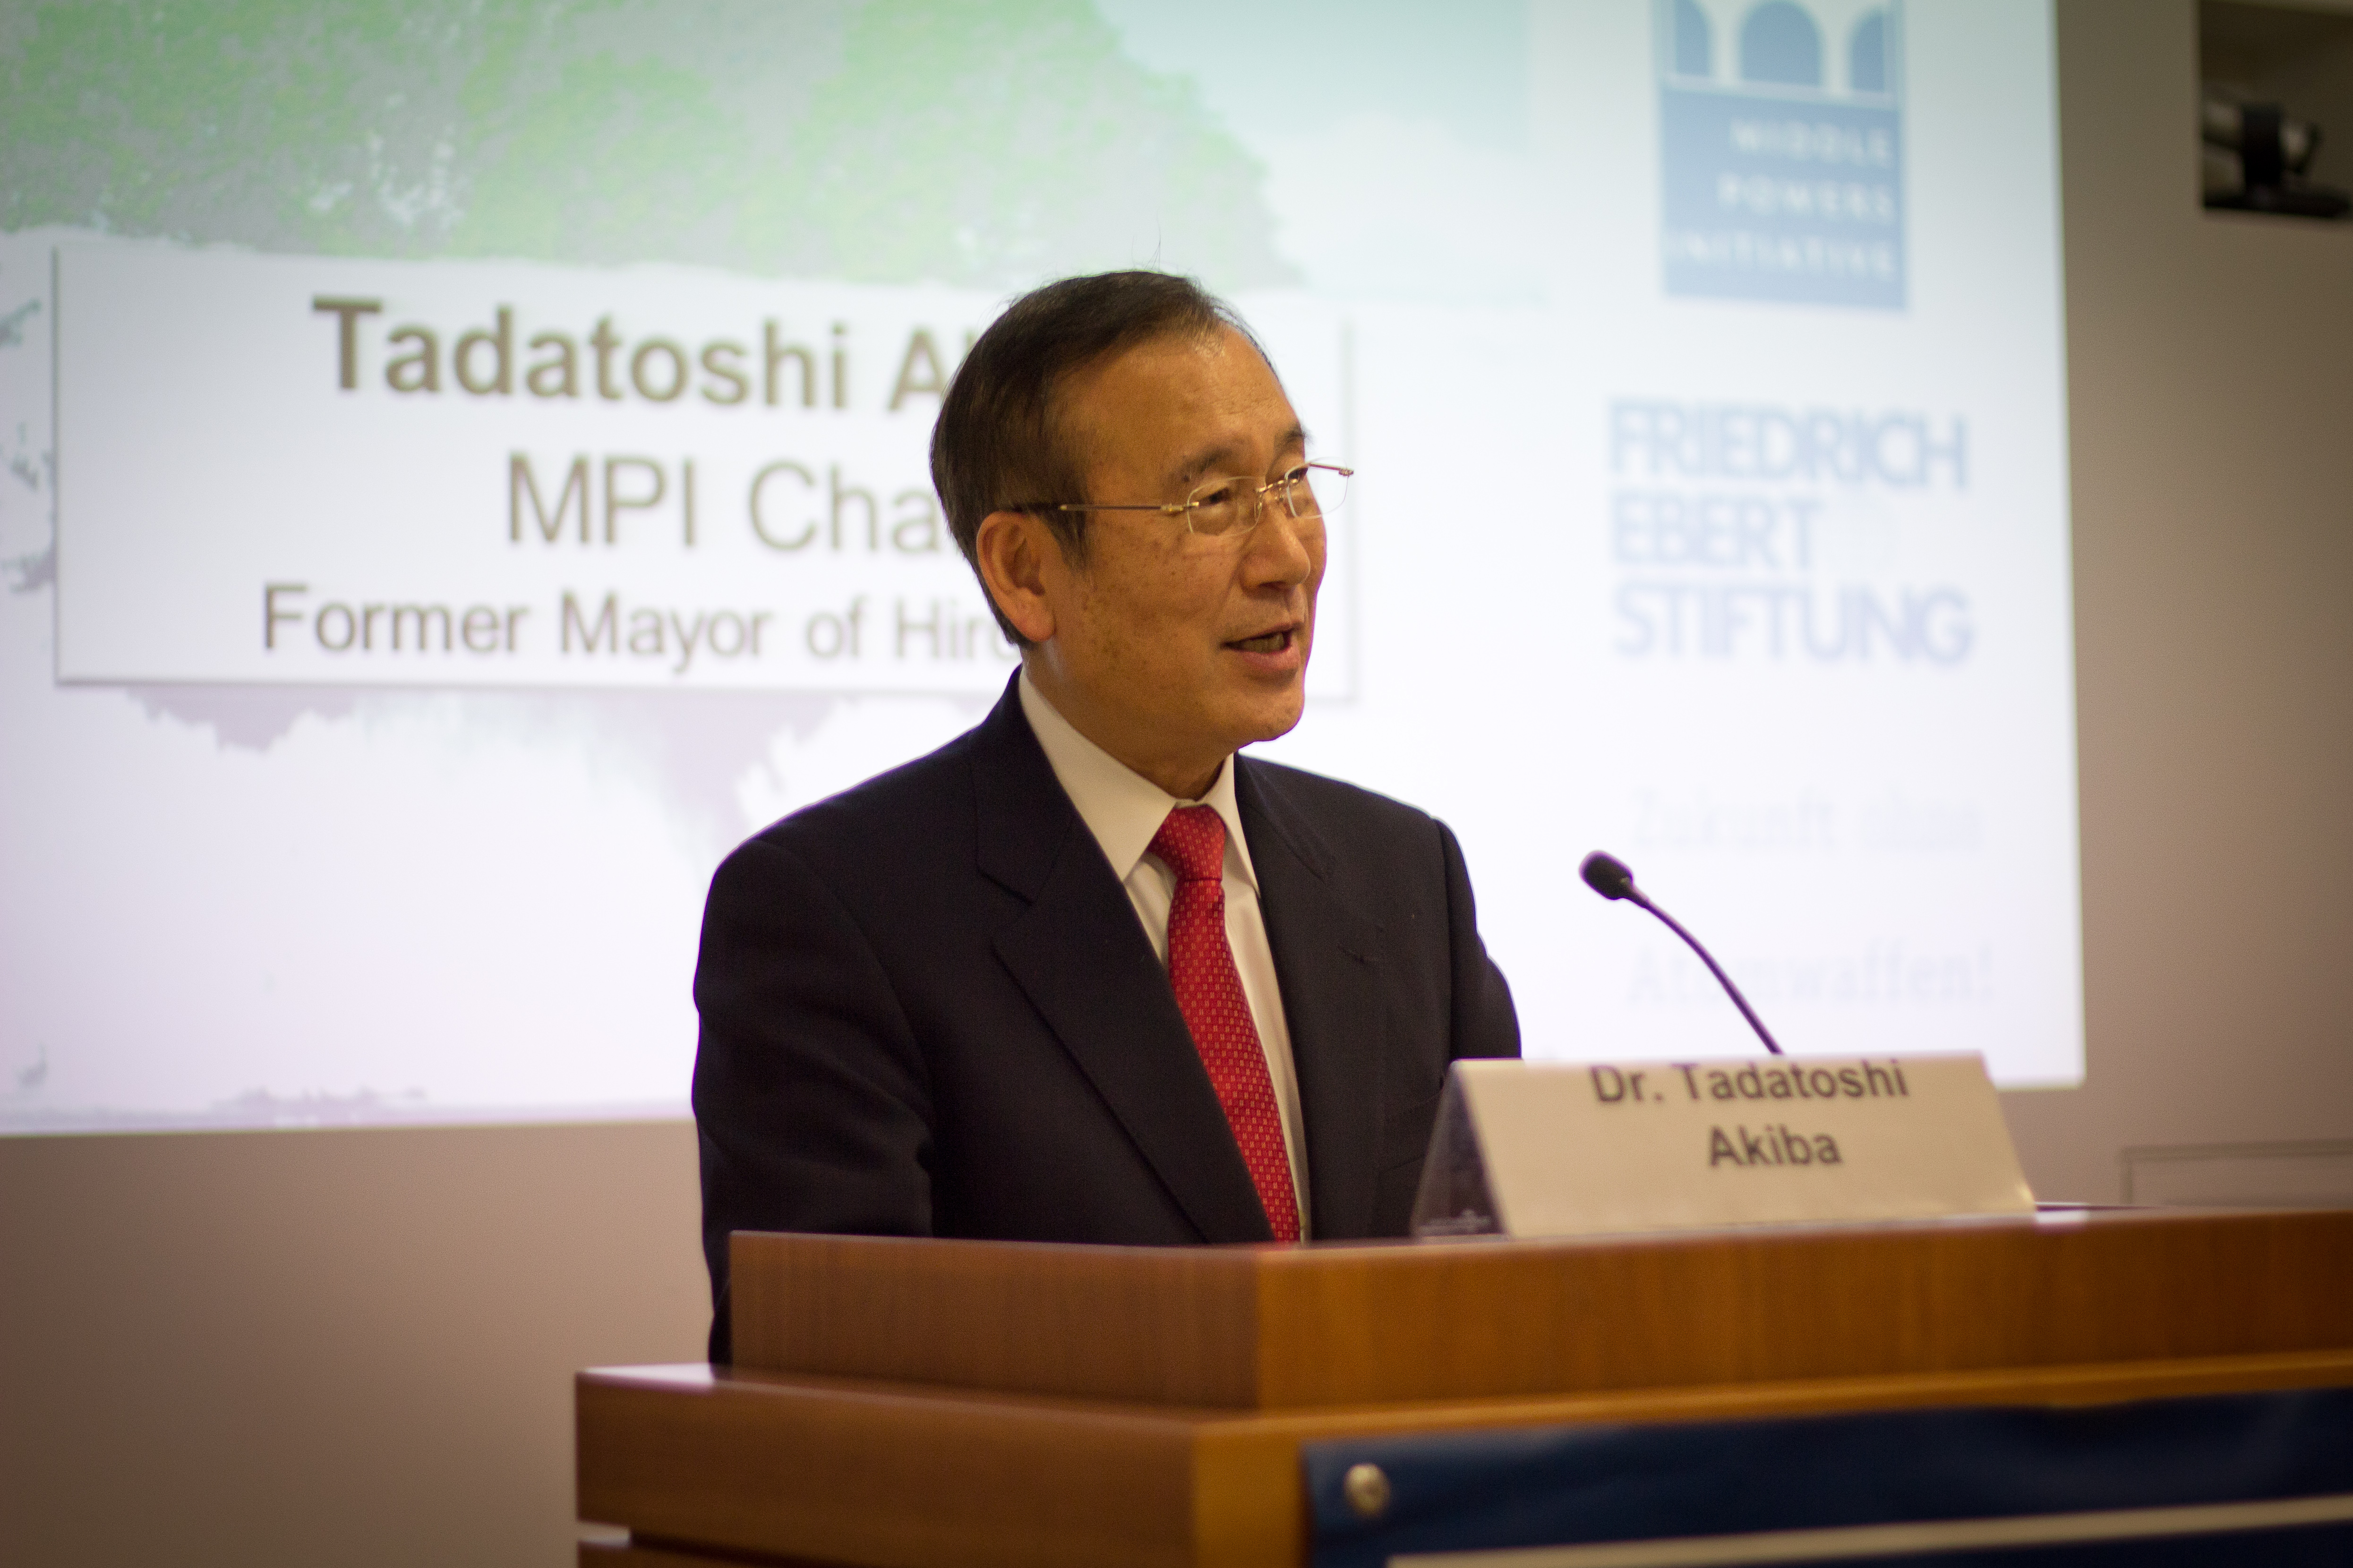 Tad Akiba, chair of the MPI, speaking at the public session